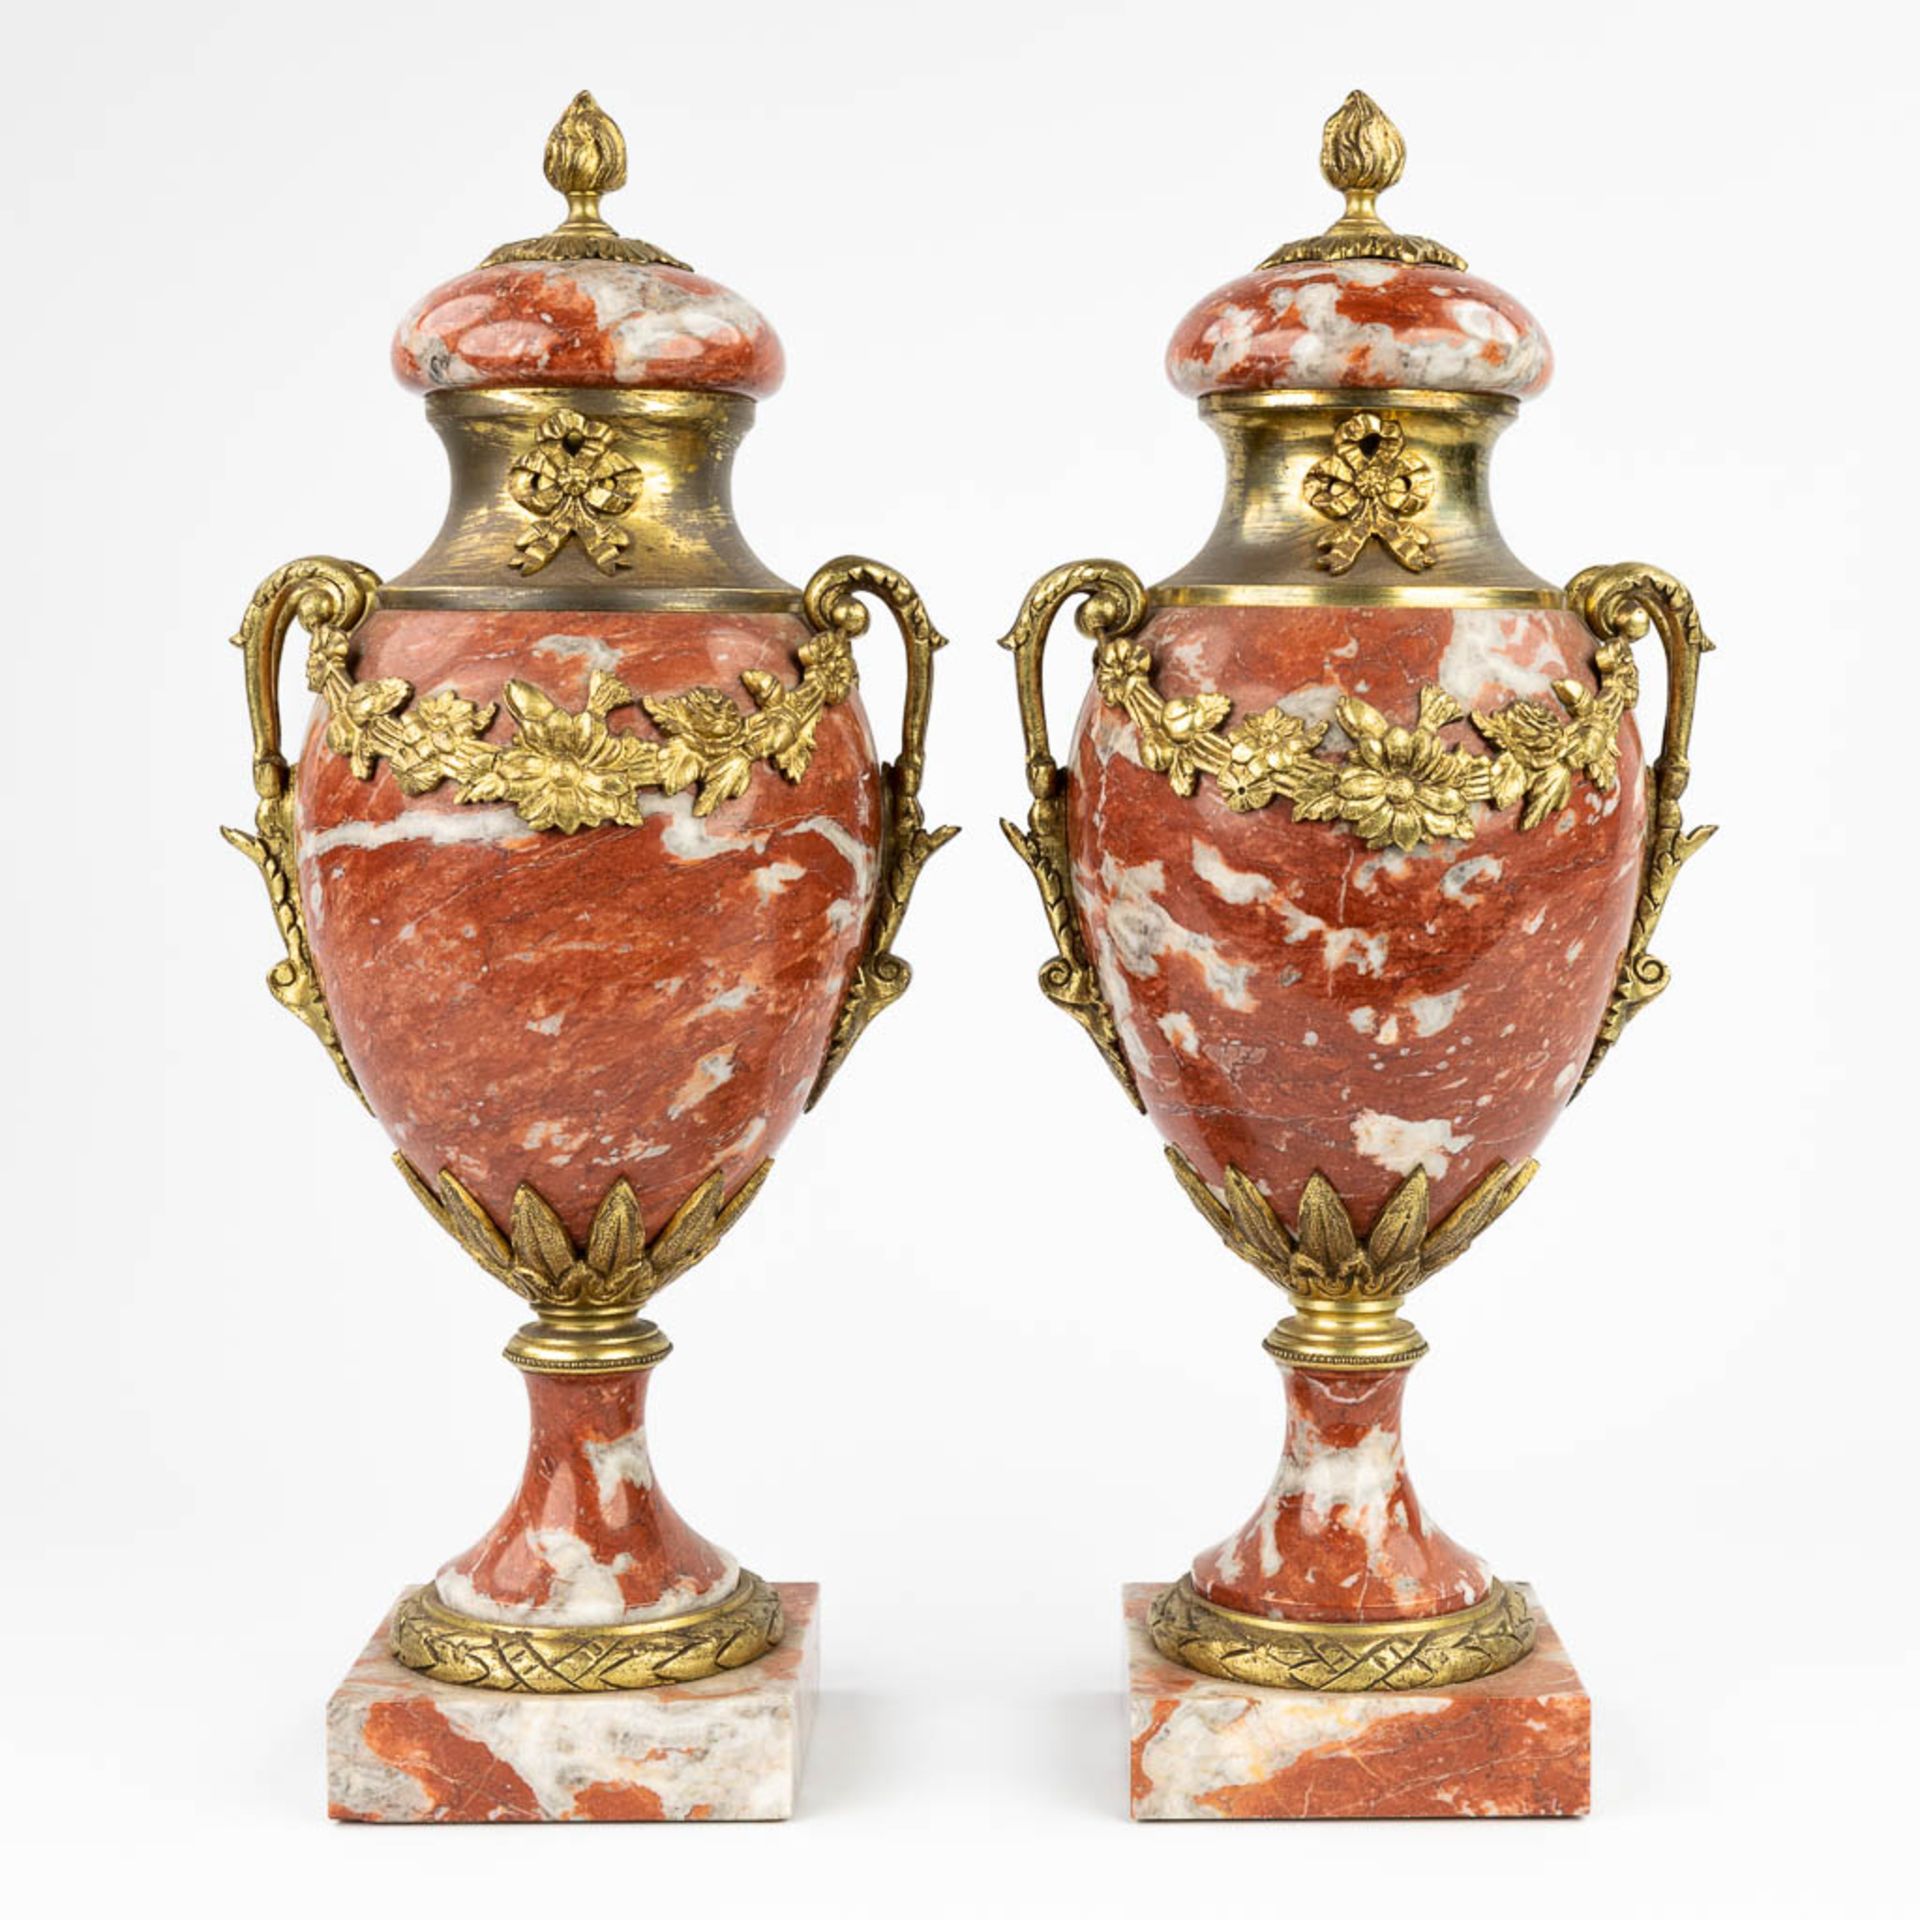 A pair of cassolettes made of red marble mounted with gilt bronze. (16 x 18 x 44,5cm) - Bild 5 aus 12